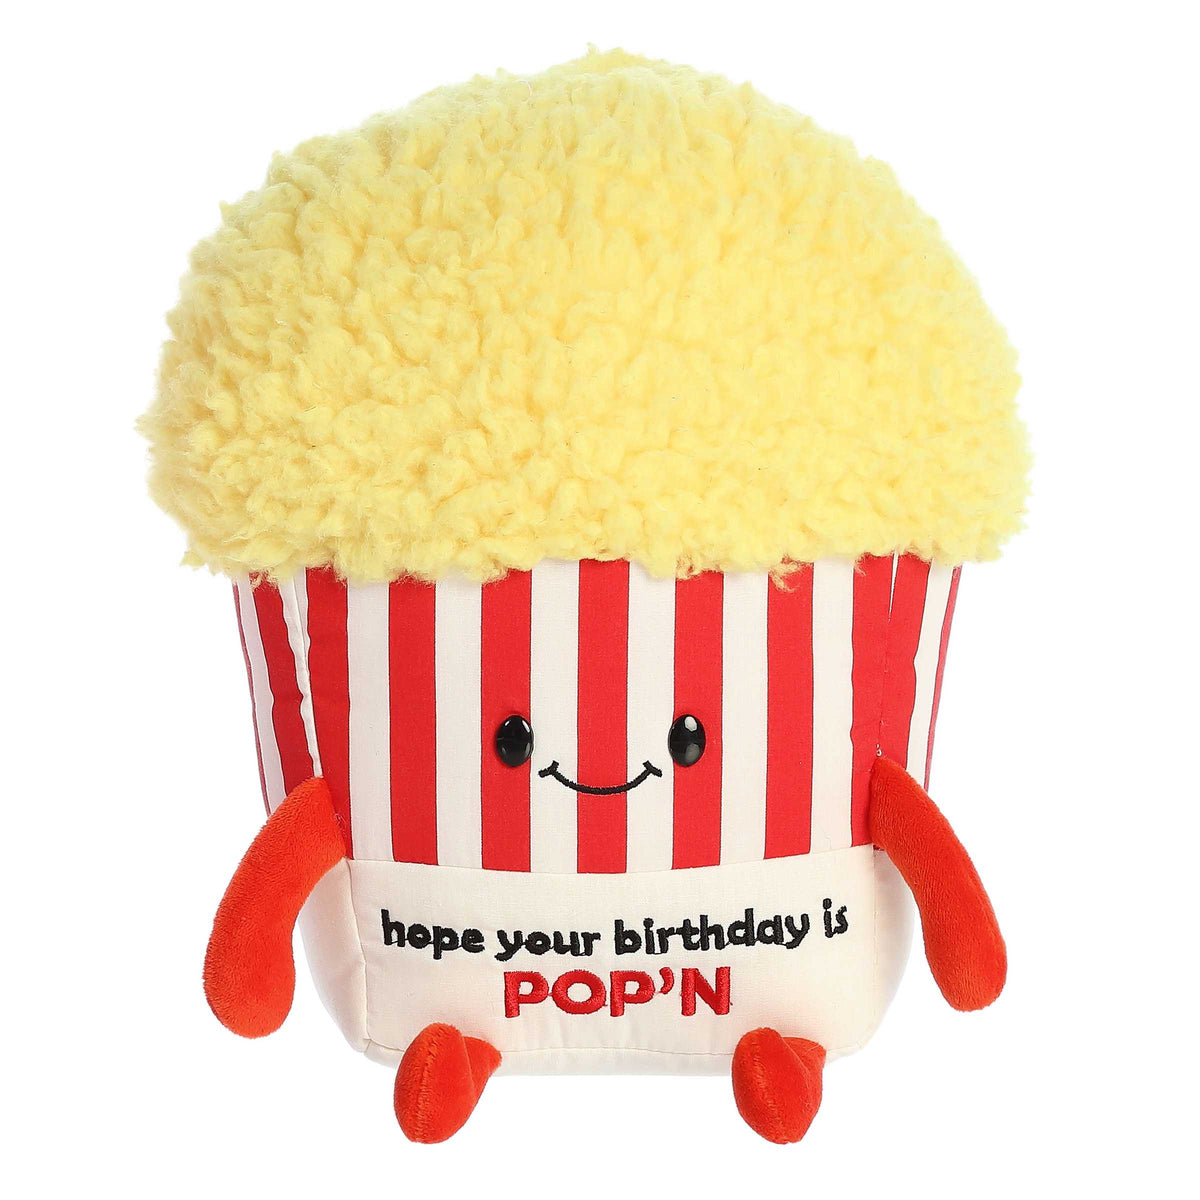 Funny popcorn plush toy with a red and white striped body, yellow fur on top, and a "Poppin' Birthday!" pun written across